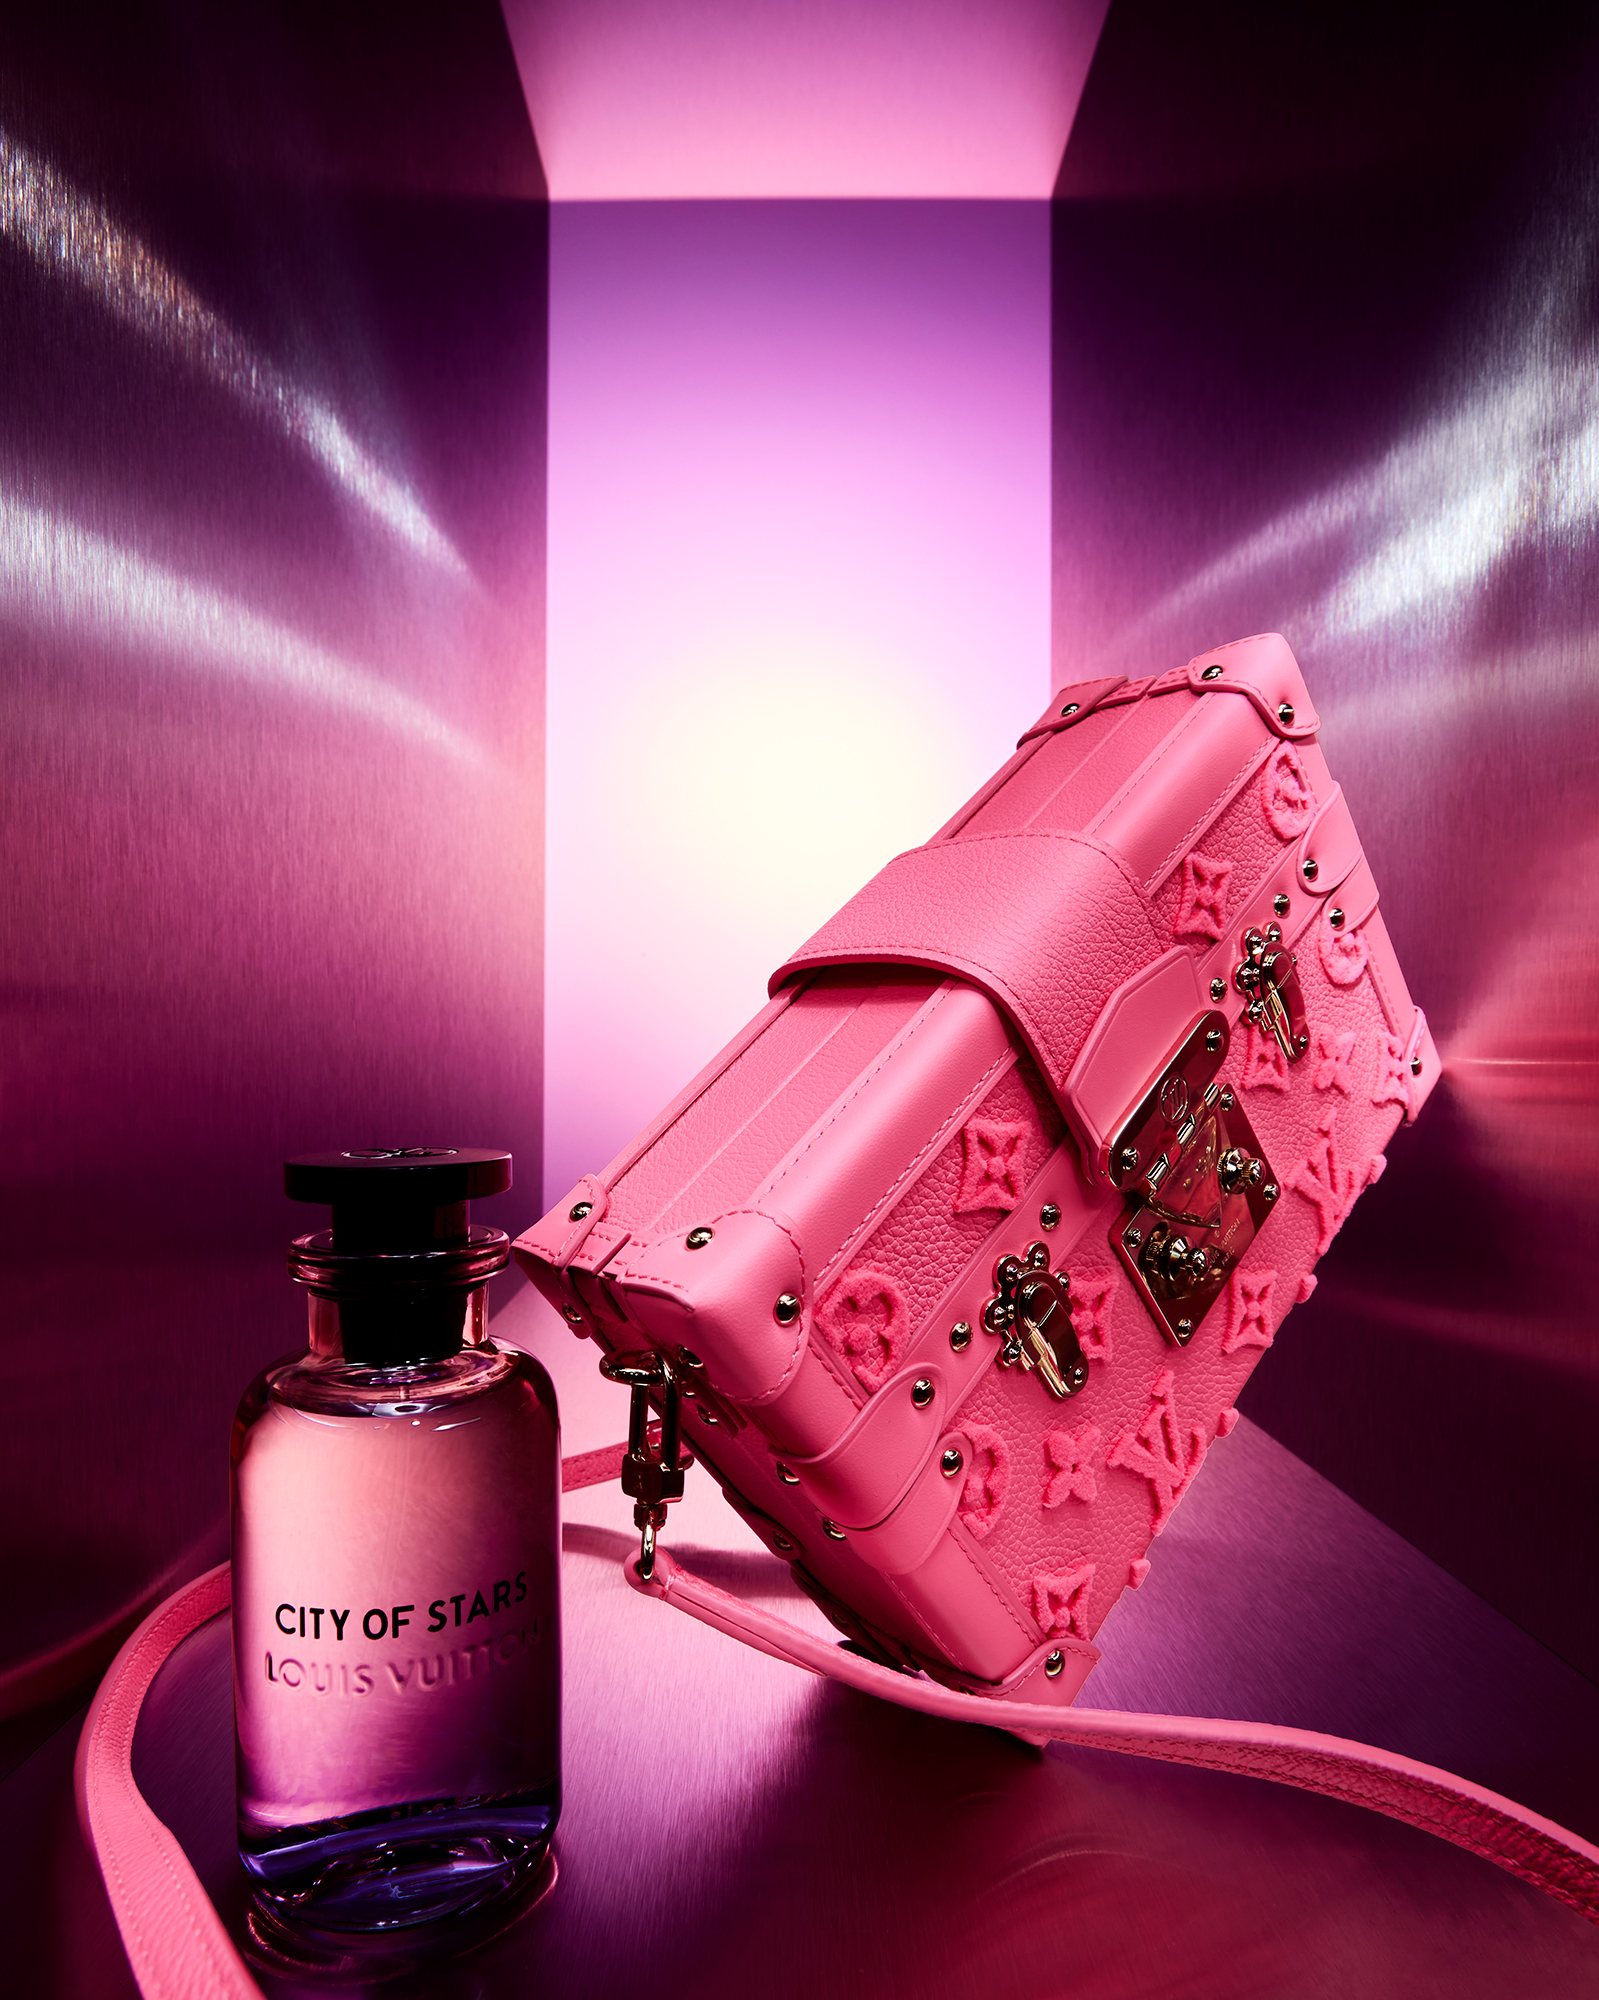 Louis Vuitton Launches New Fragrance in 'Les Extraits' Collection, Myriad -  V Magazine